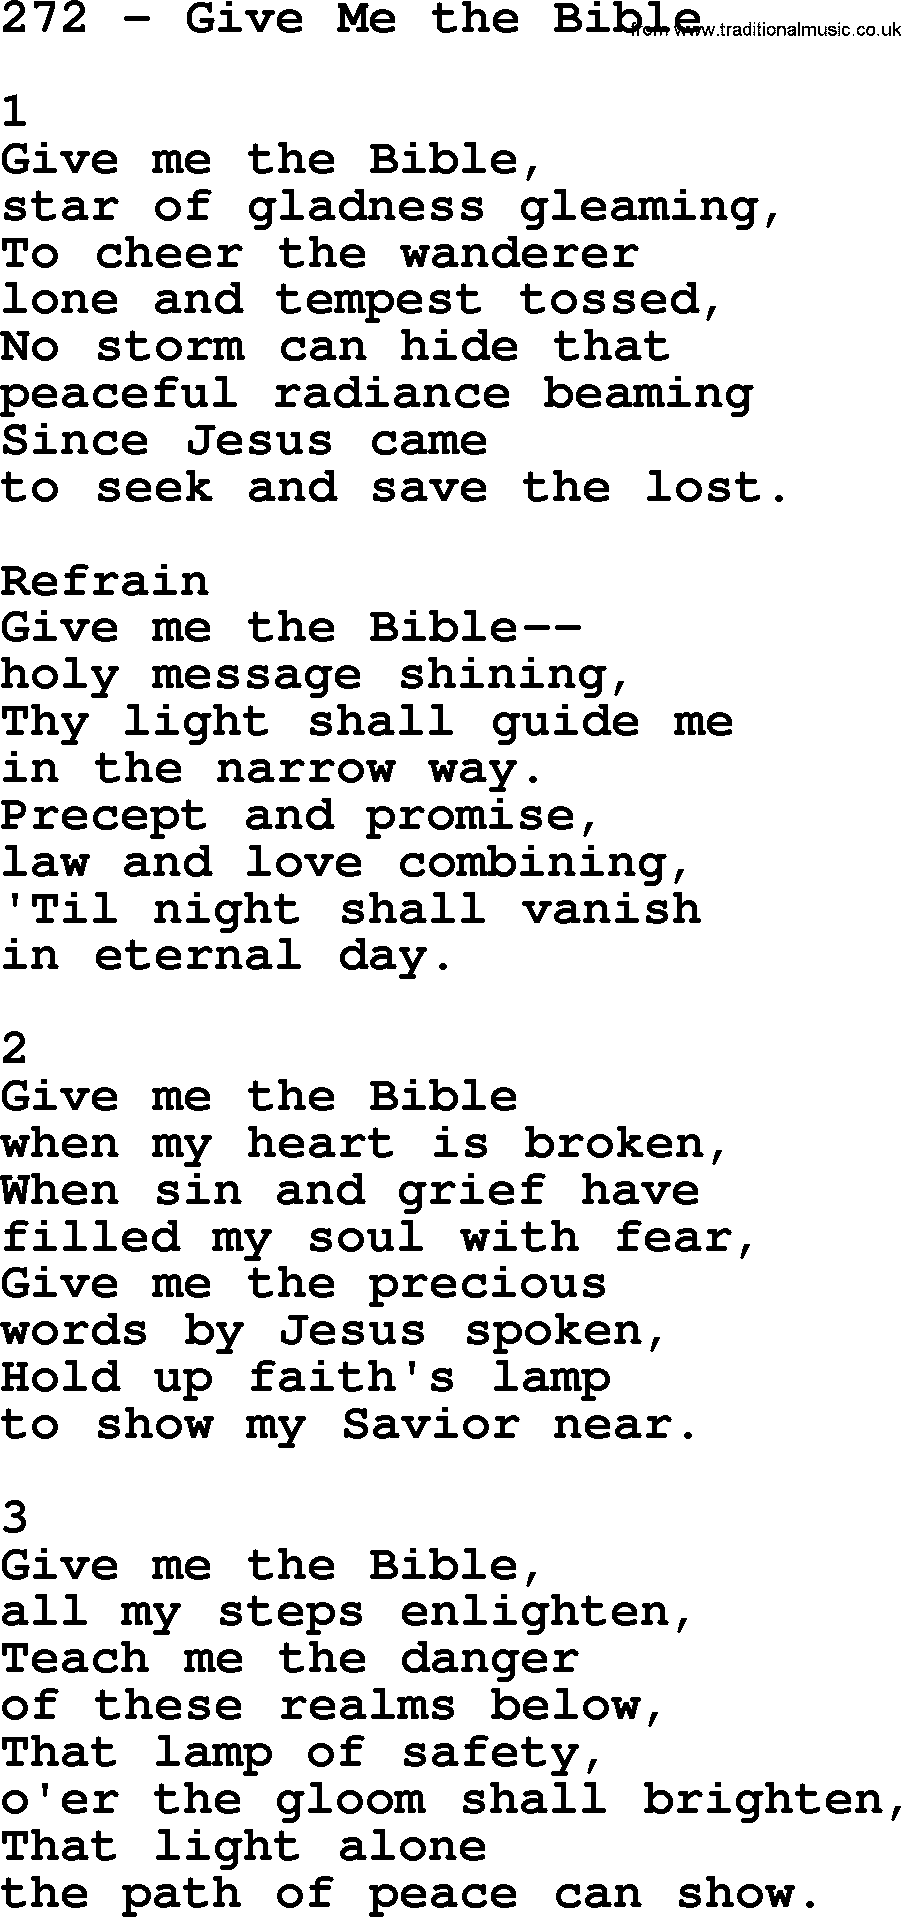 Complete Adventis Hymnal, title: 272-Give Me The Bible, with lyrics, midi, mp3, powerpoints(PPT) and PDF,